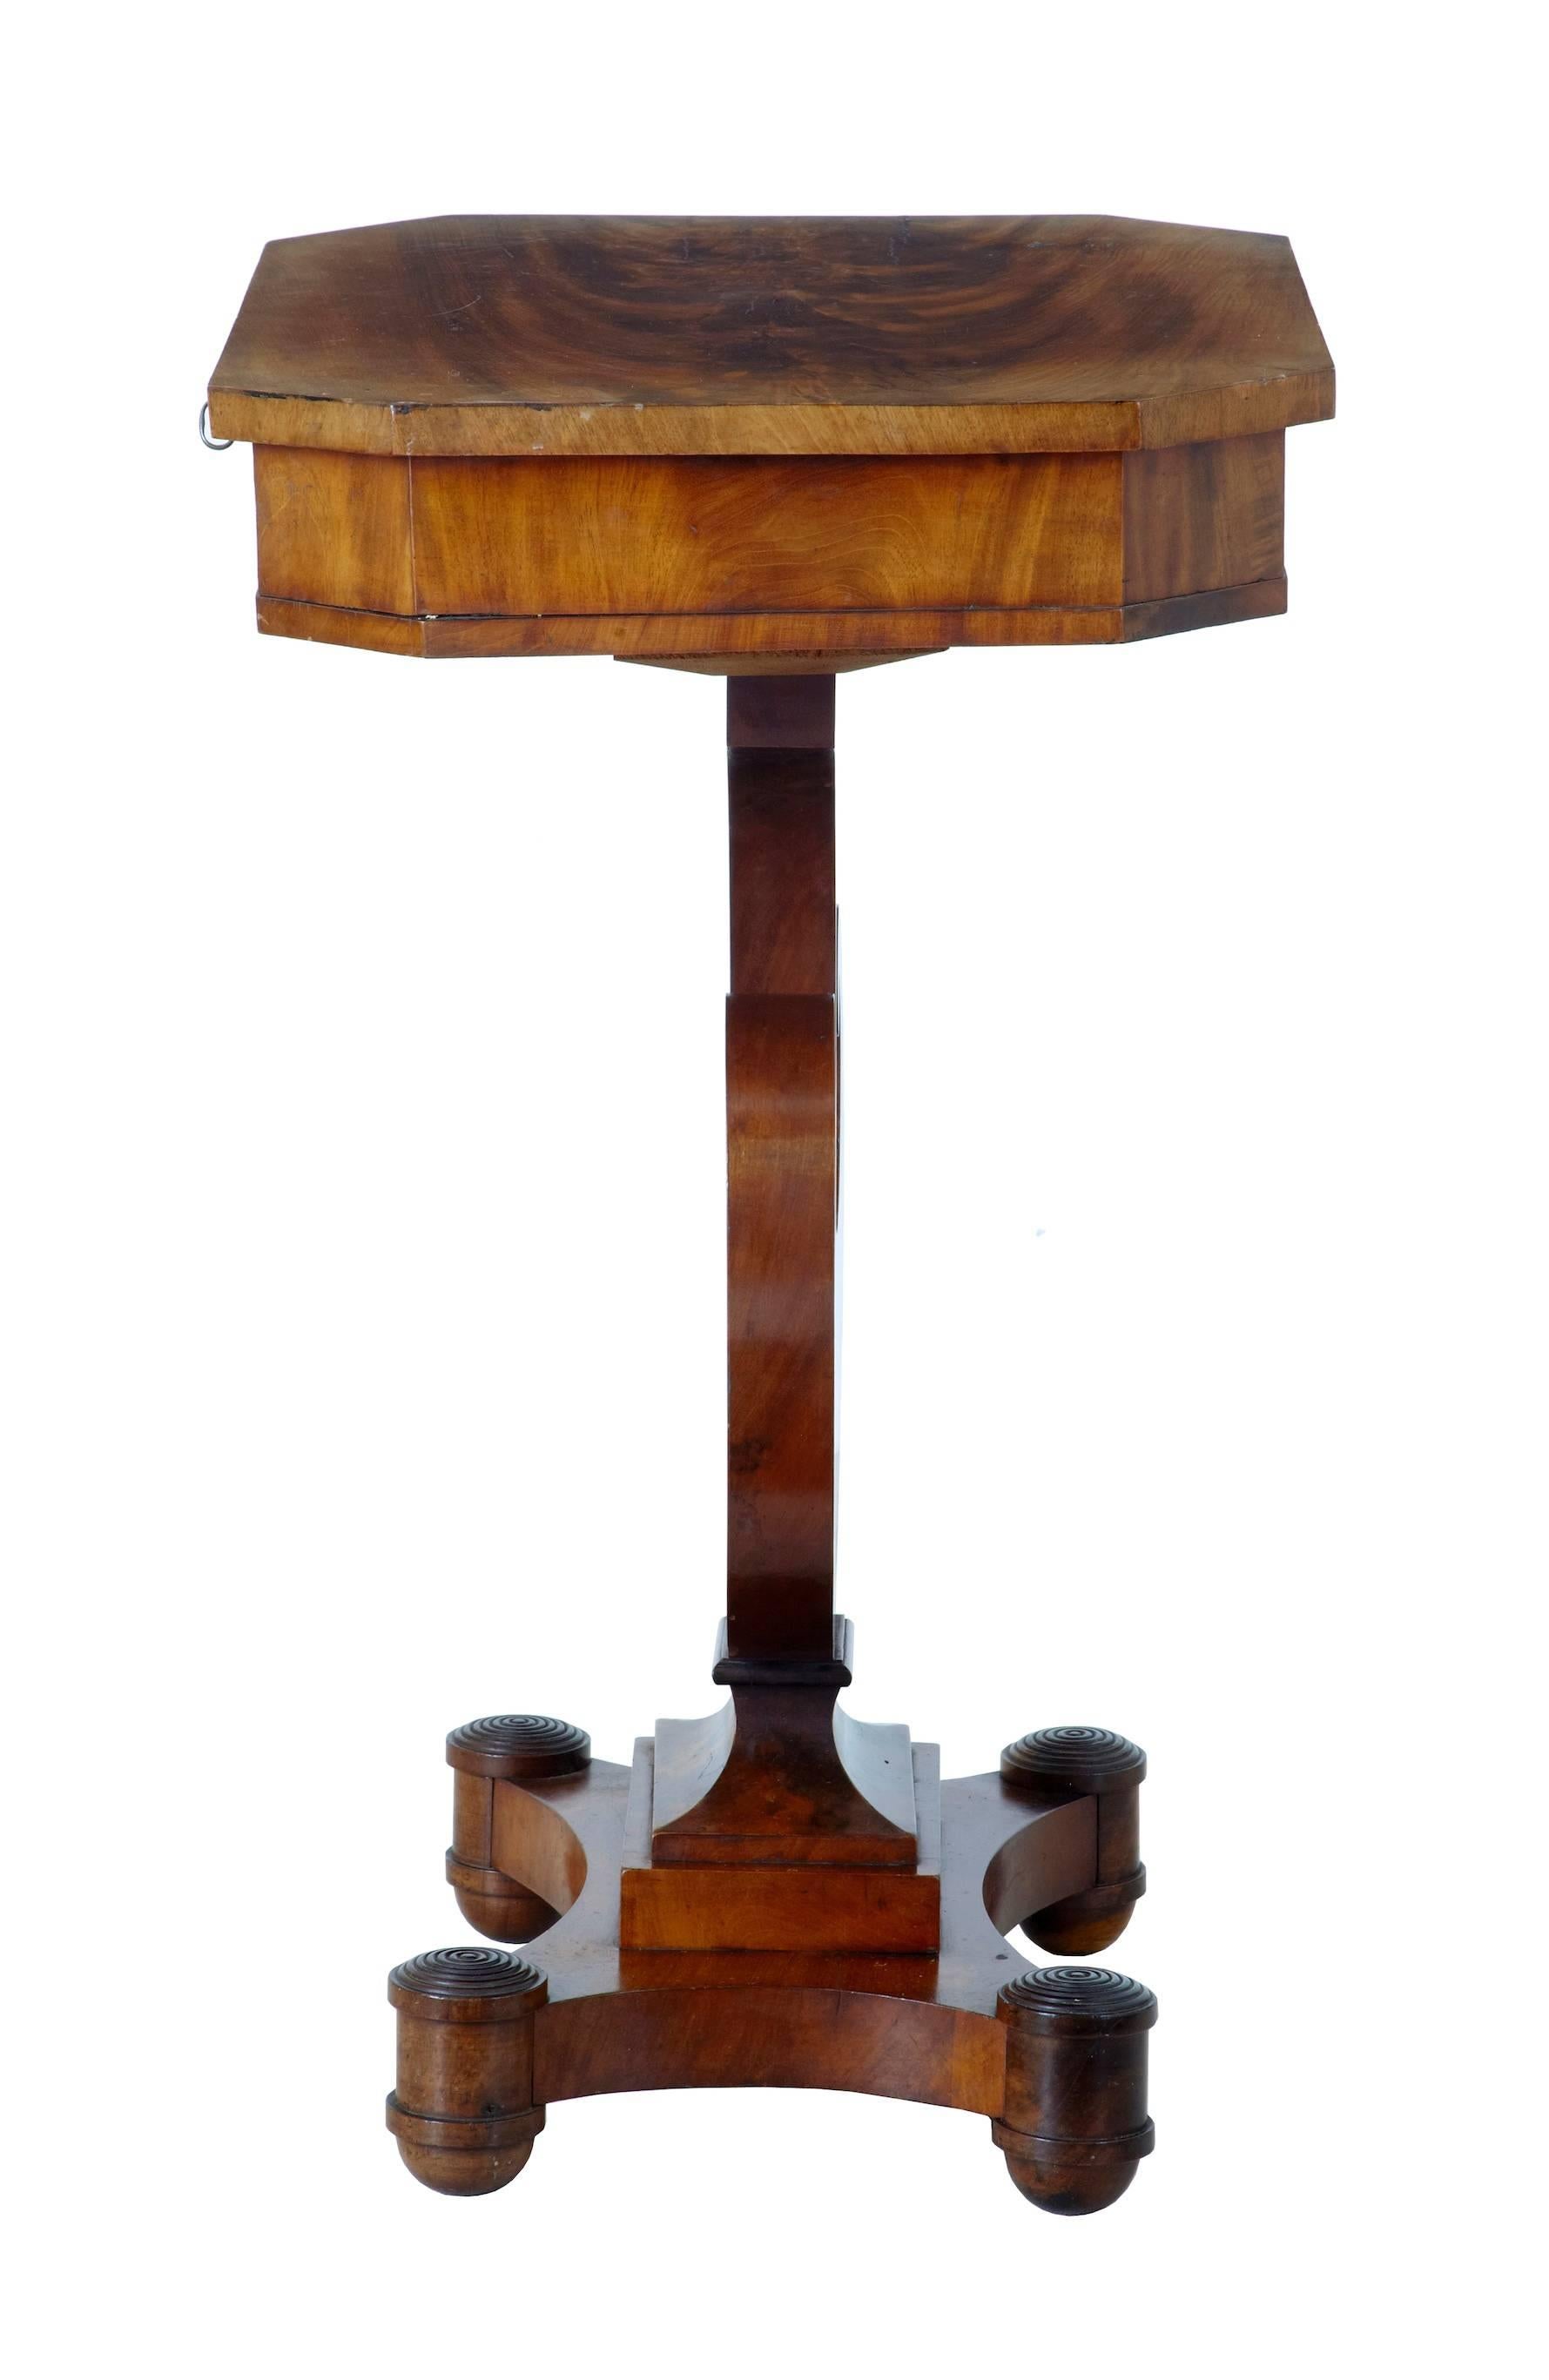 Fine quality 19th century mahogany work table,
circa 1860.
Shaped top with fitted drawer below and hinged pin cushion.
Lyre shaped base, standing on quadriform base with roundel decorations above the feet.

Measures: Height: 29 1/3